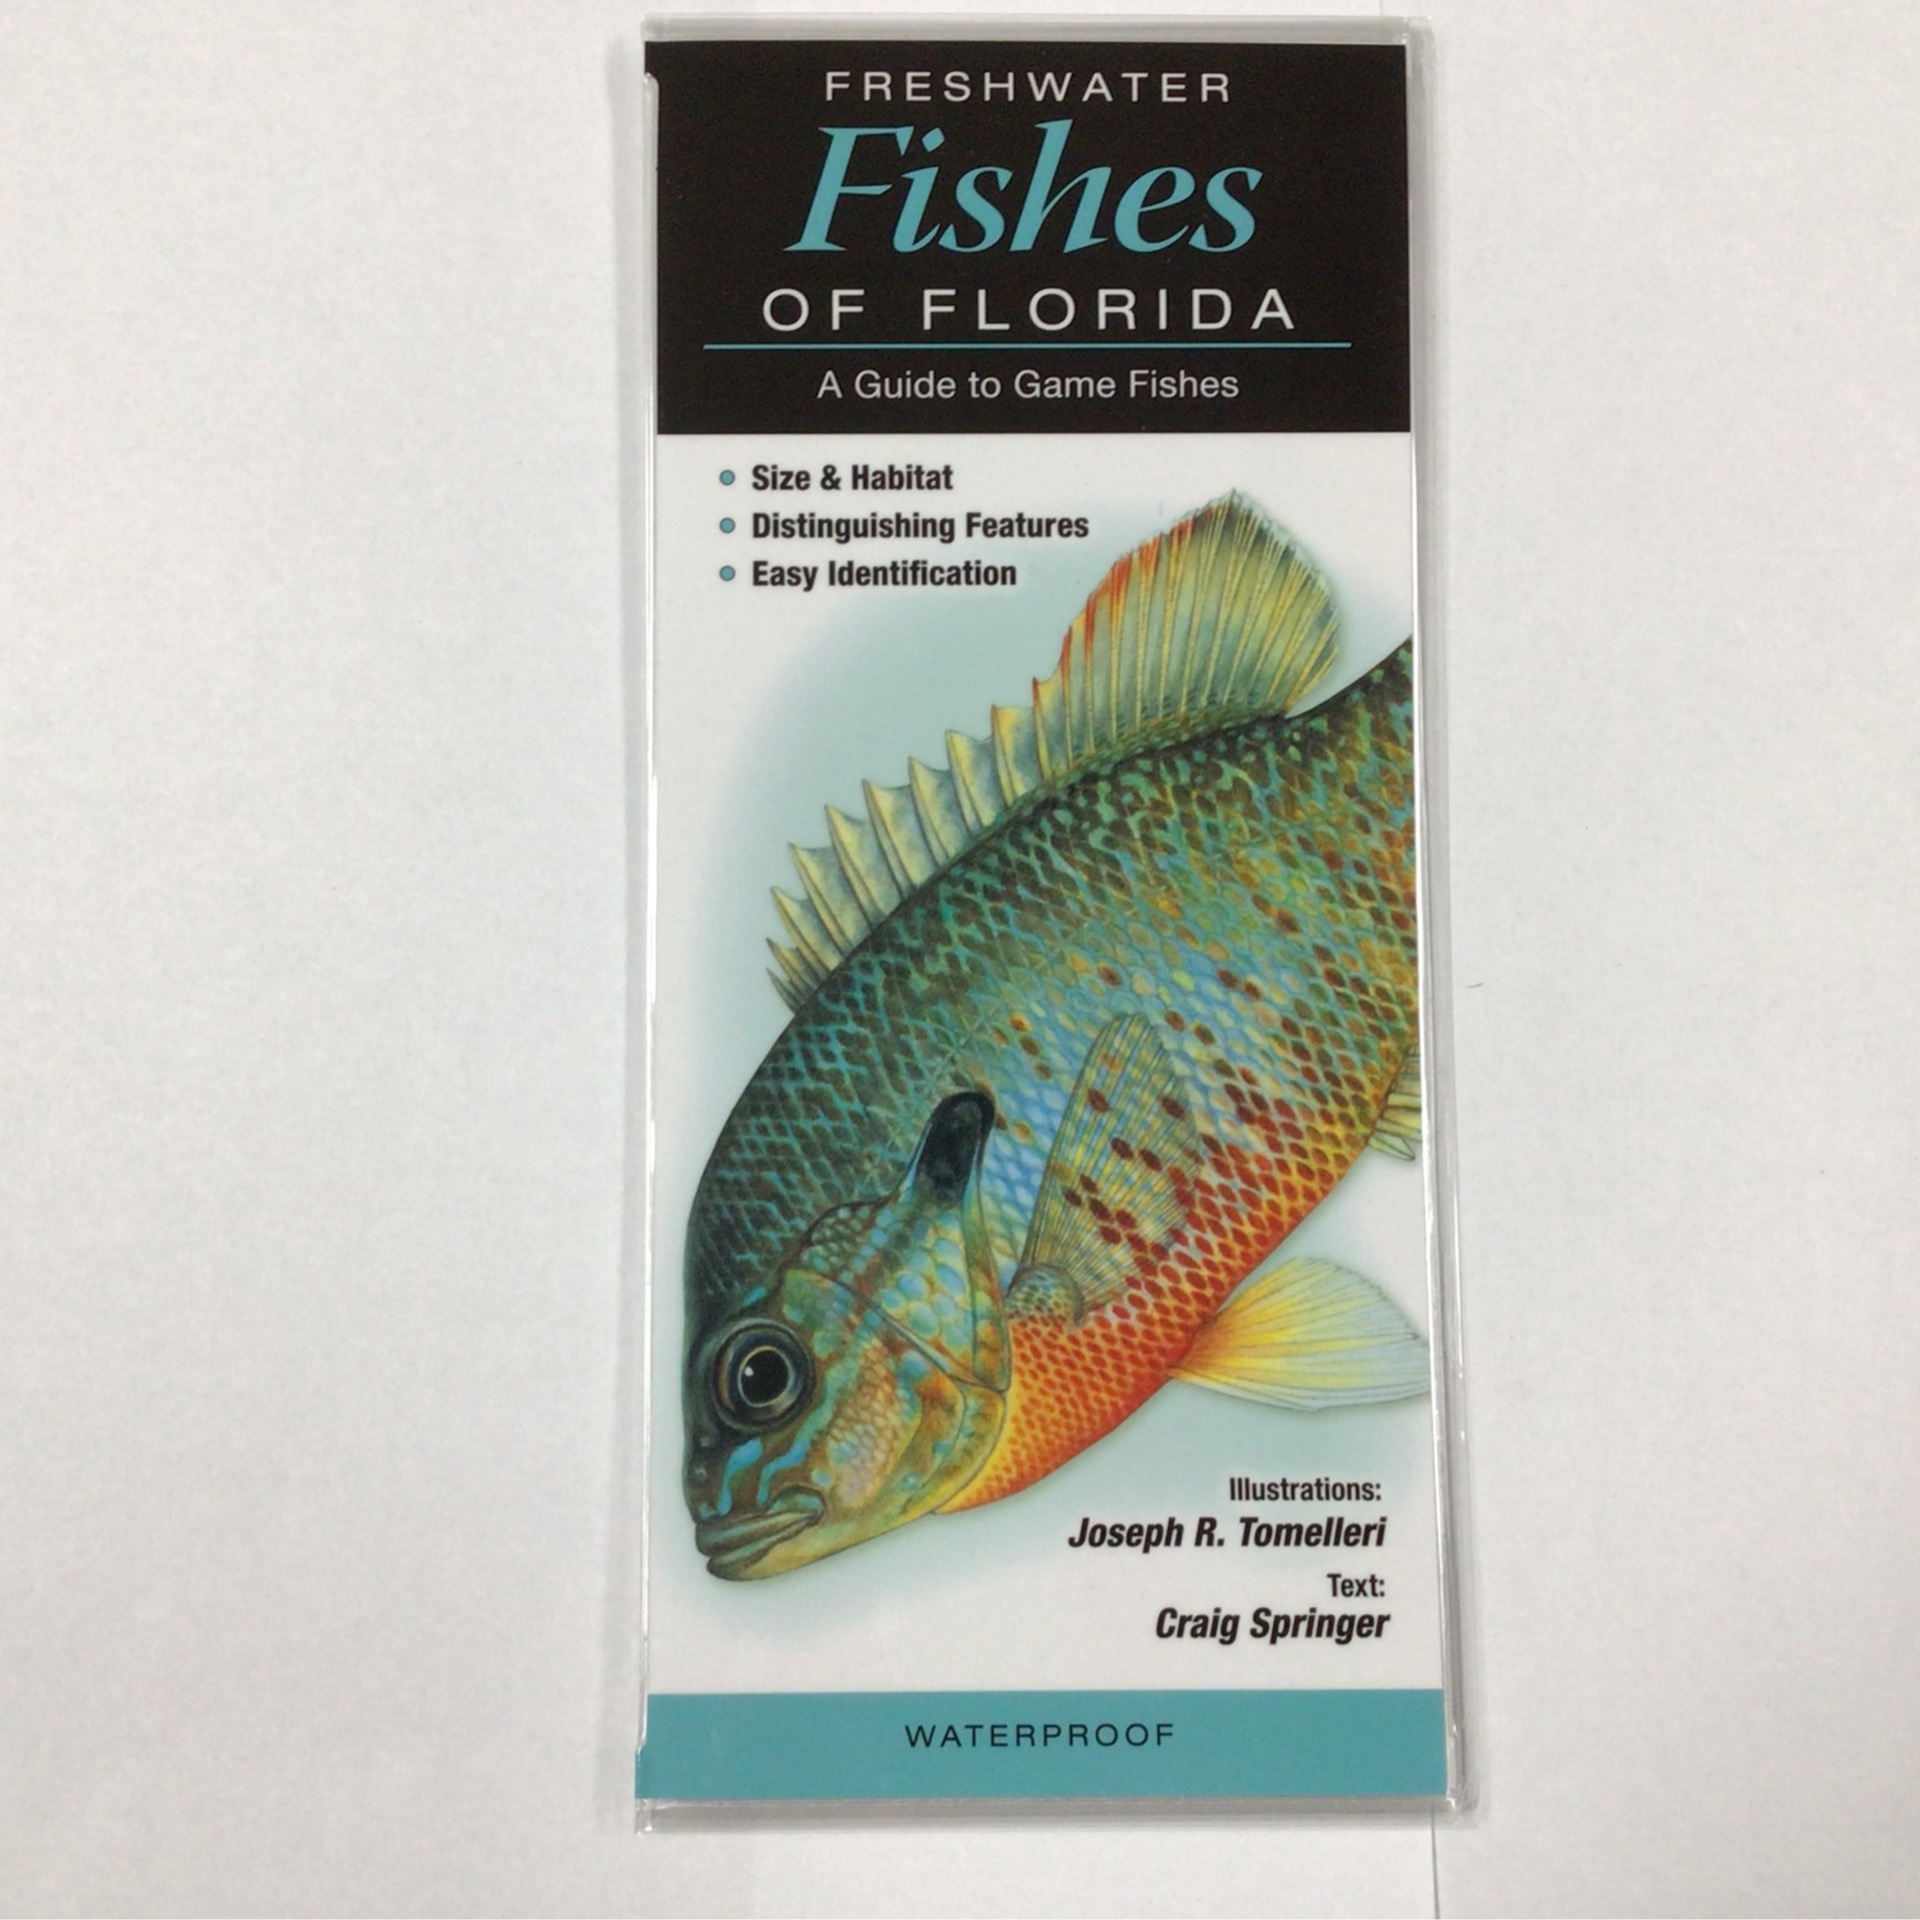 Wp- Freshwater Fish of Florida Field Guide - Florida National